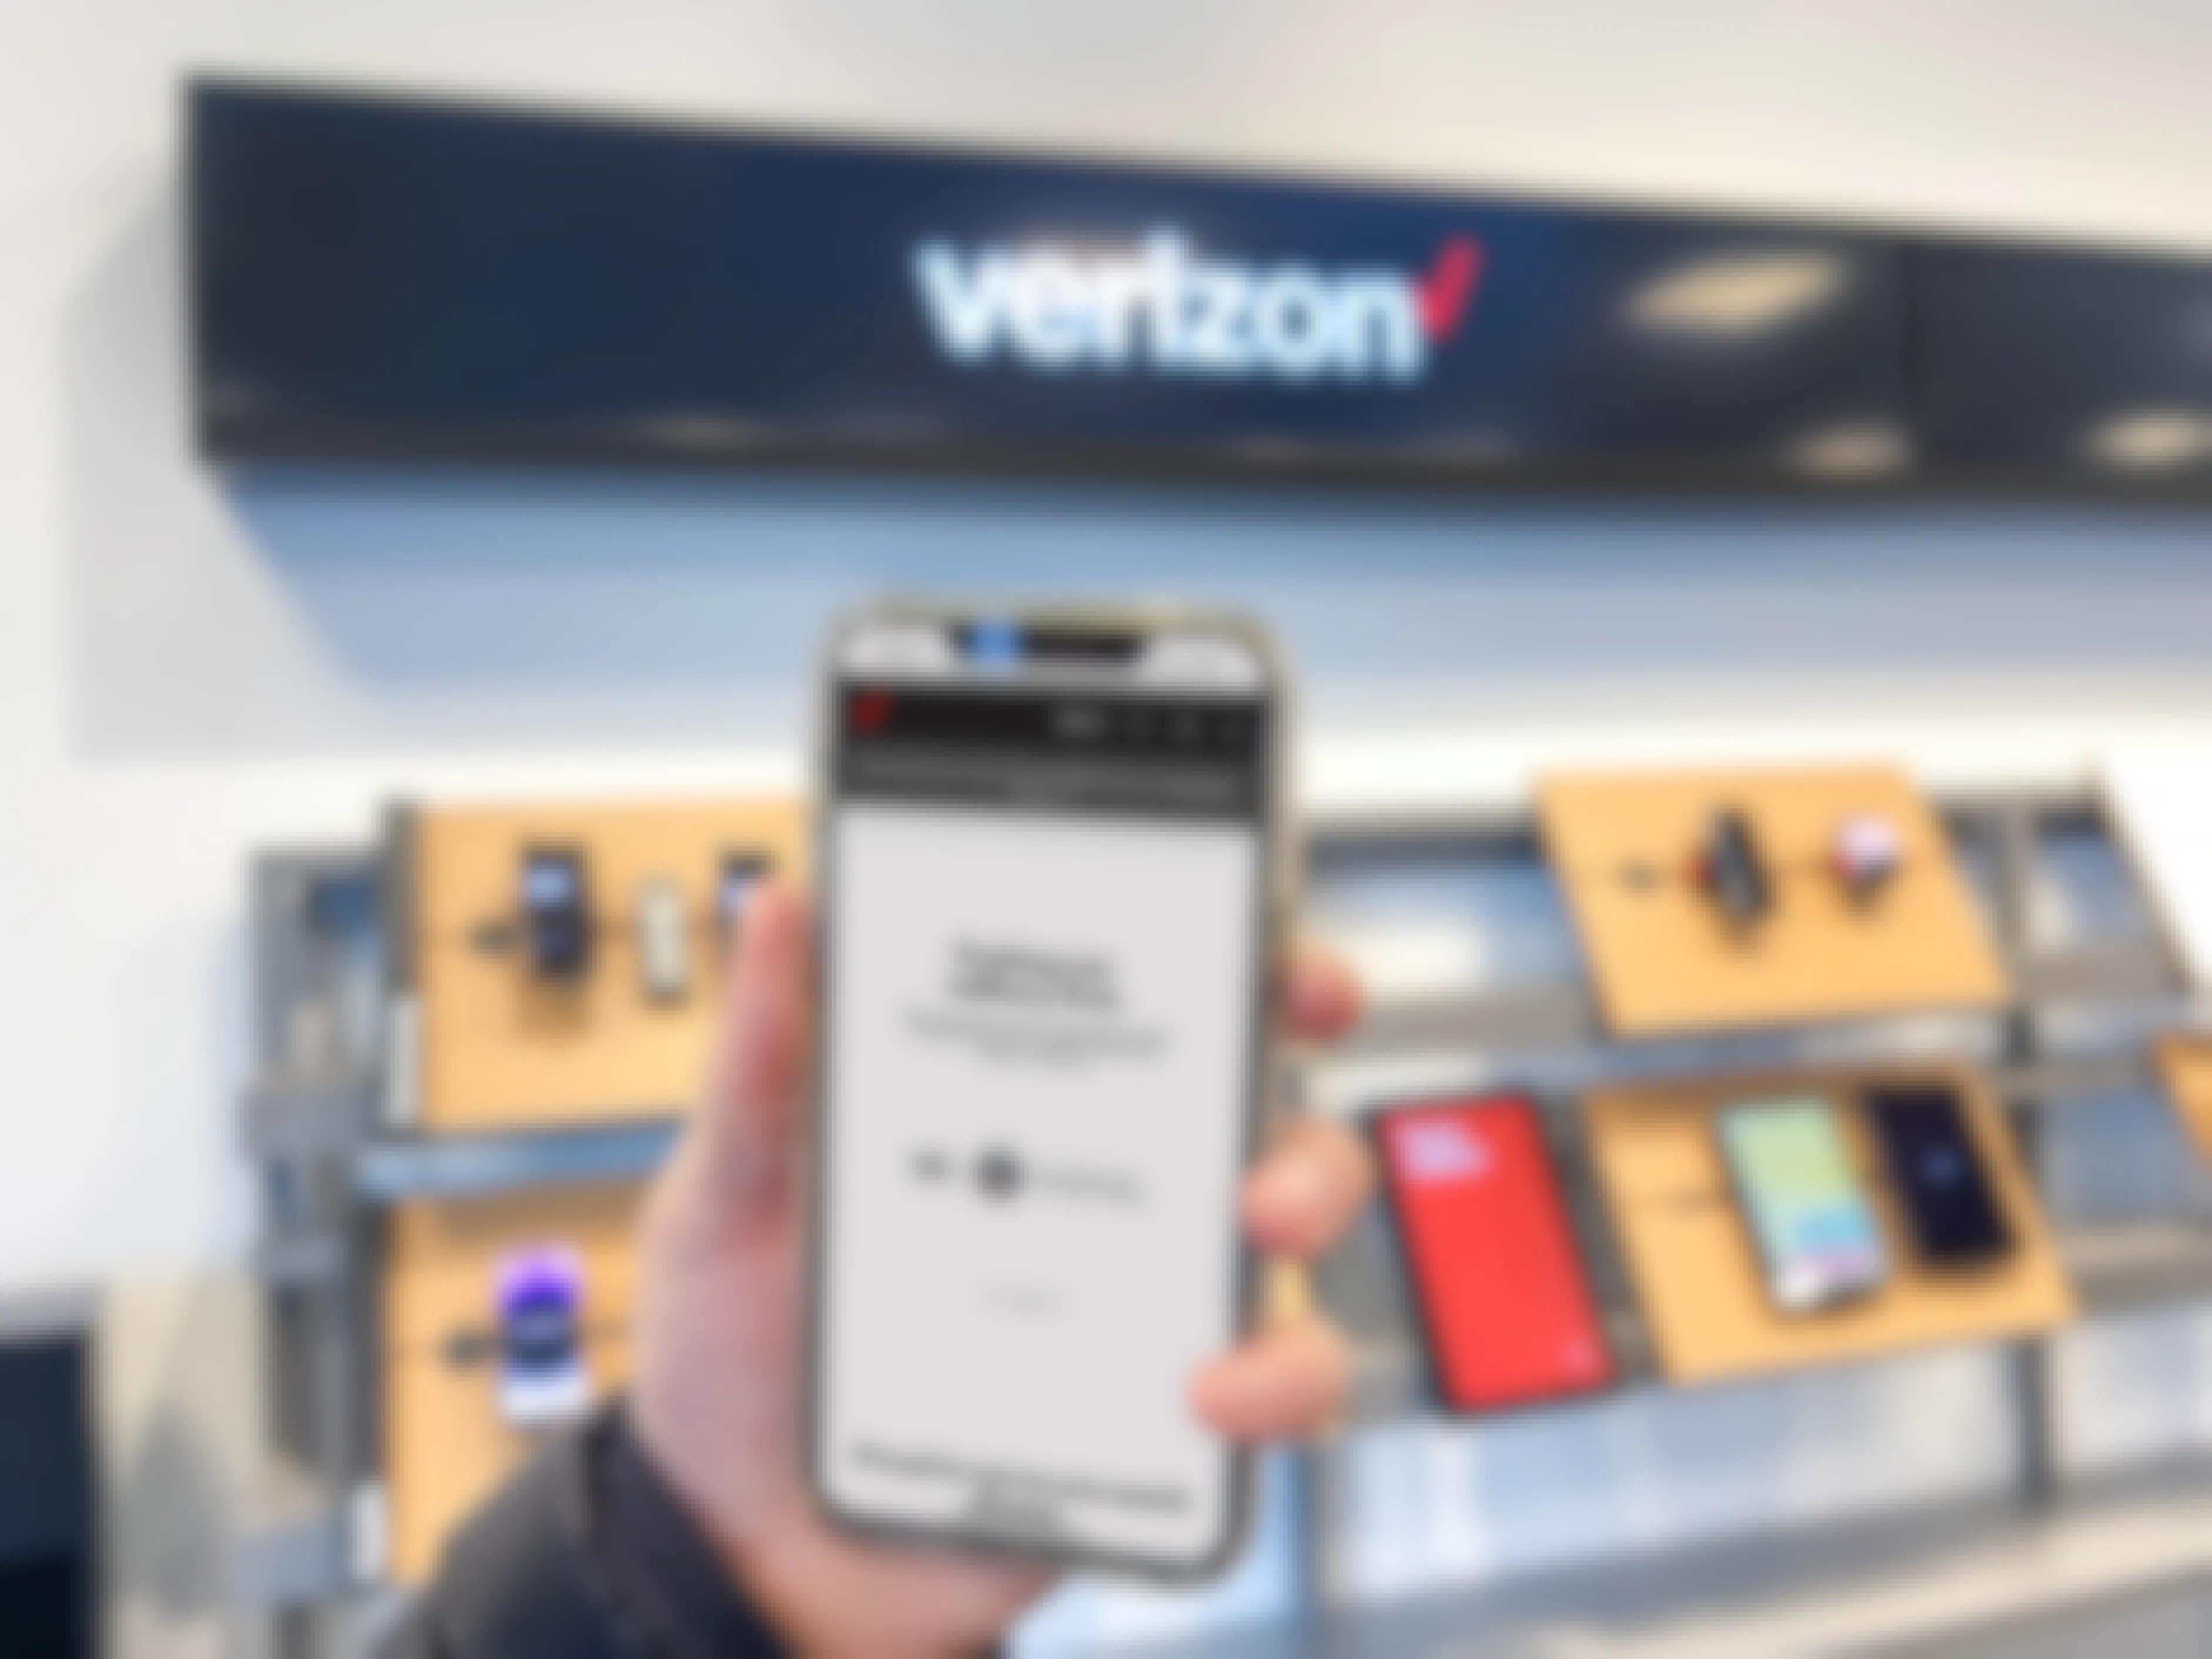 a hand holding a cellphone with military page on app in front of verizon sign 